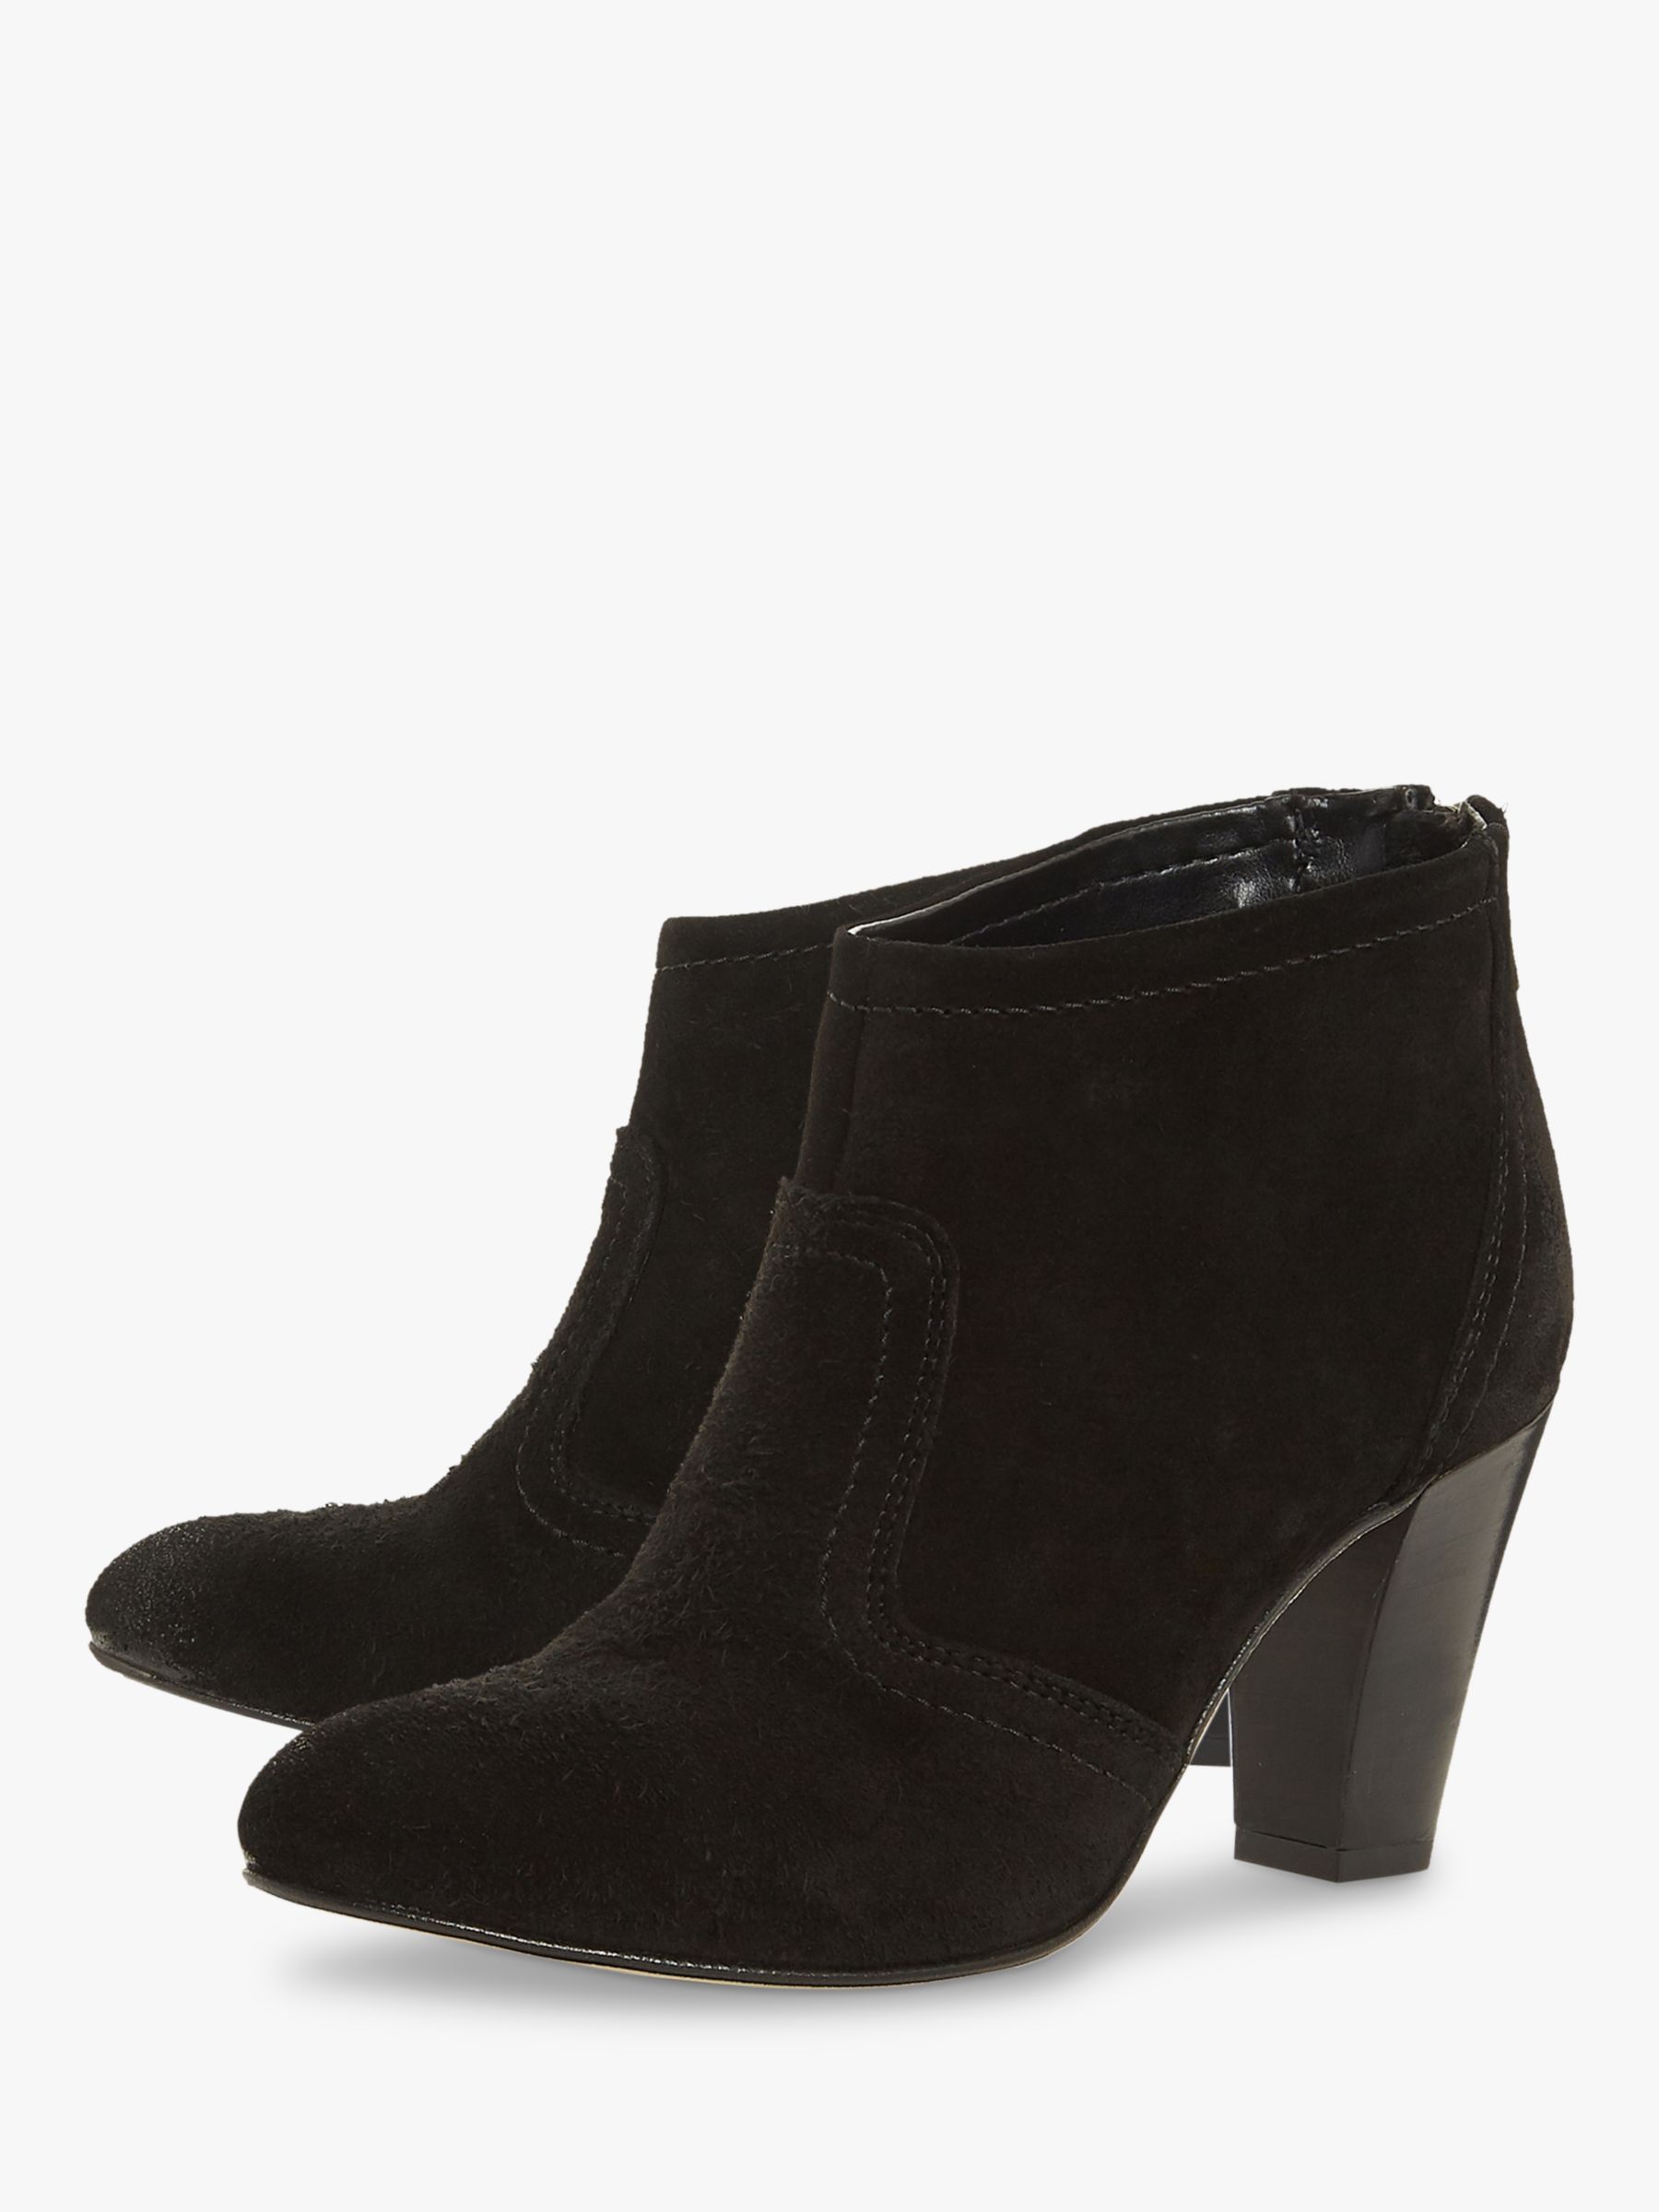 penneys black boots